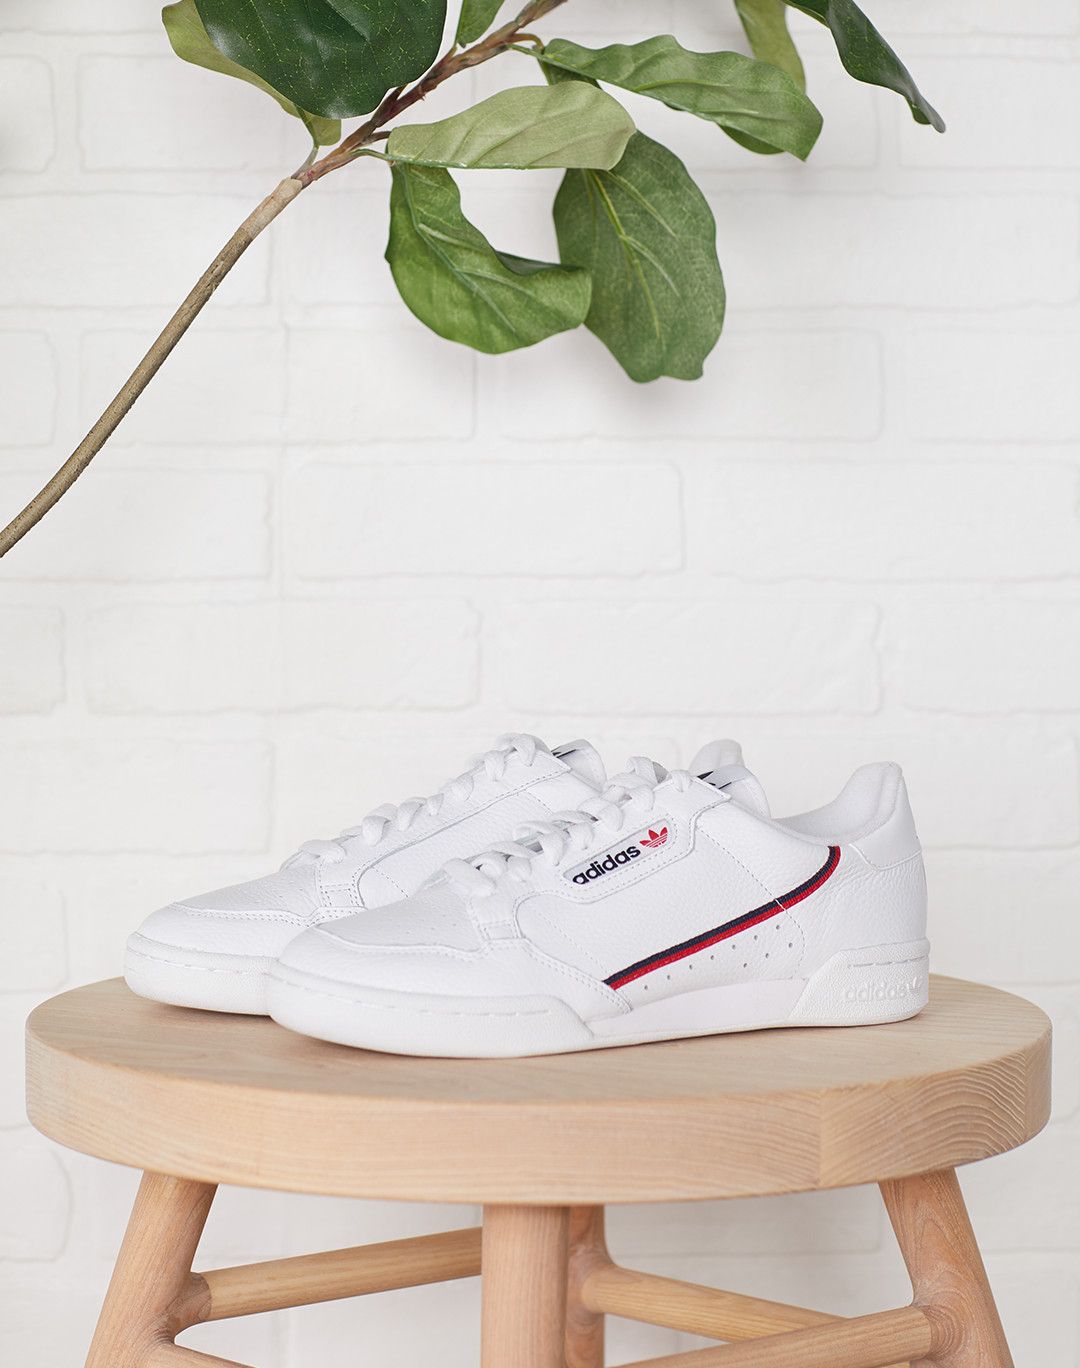 The Fresh White Sneaker That Everyone Can (and Should) Spring